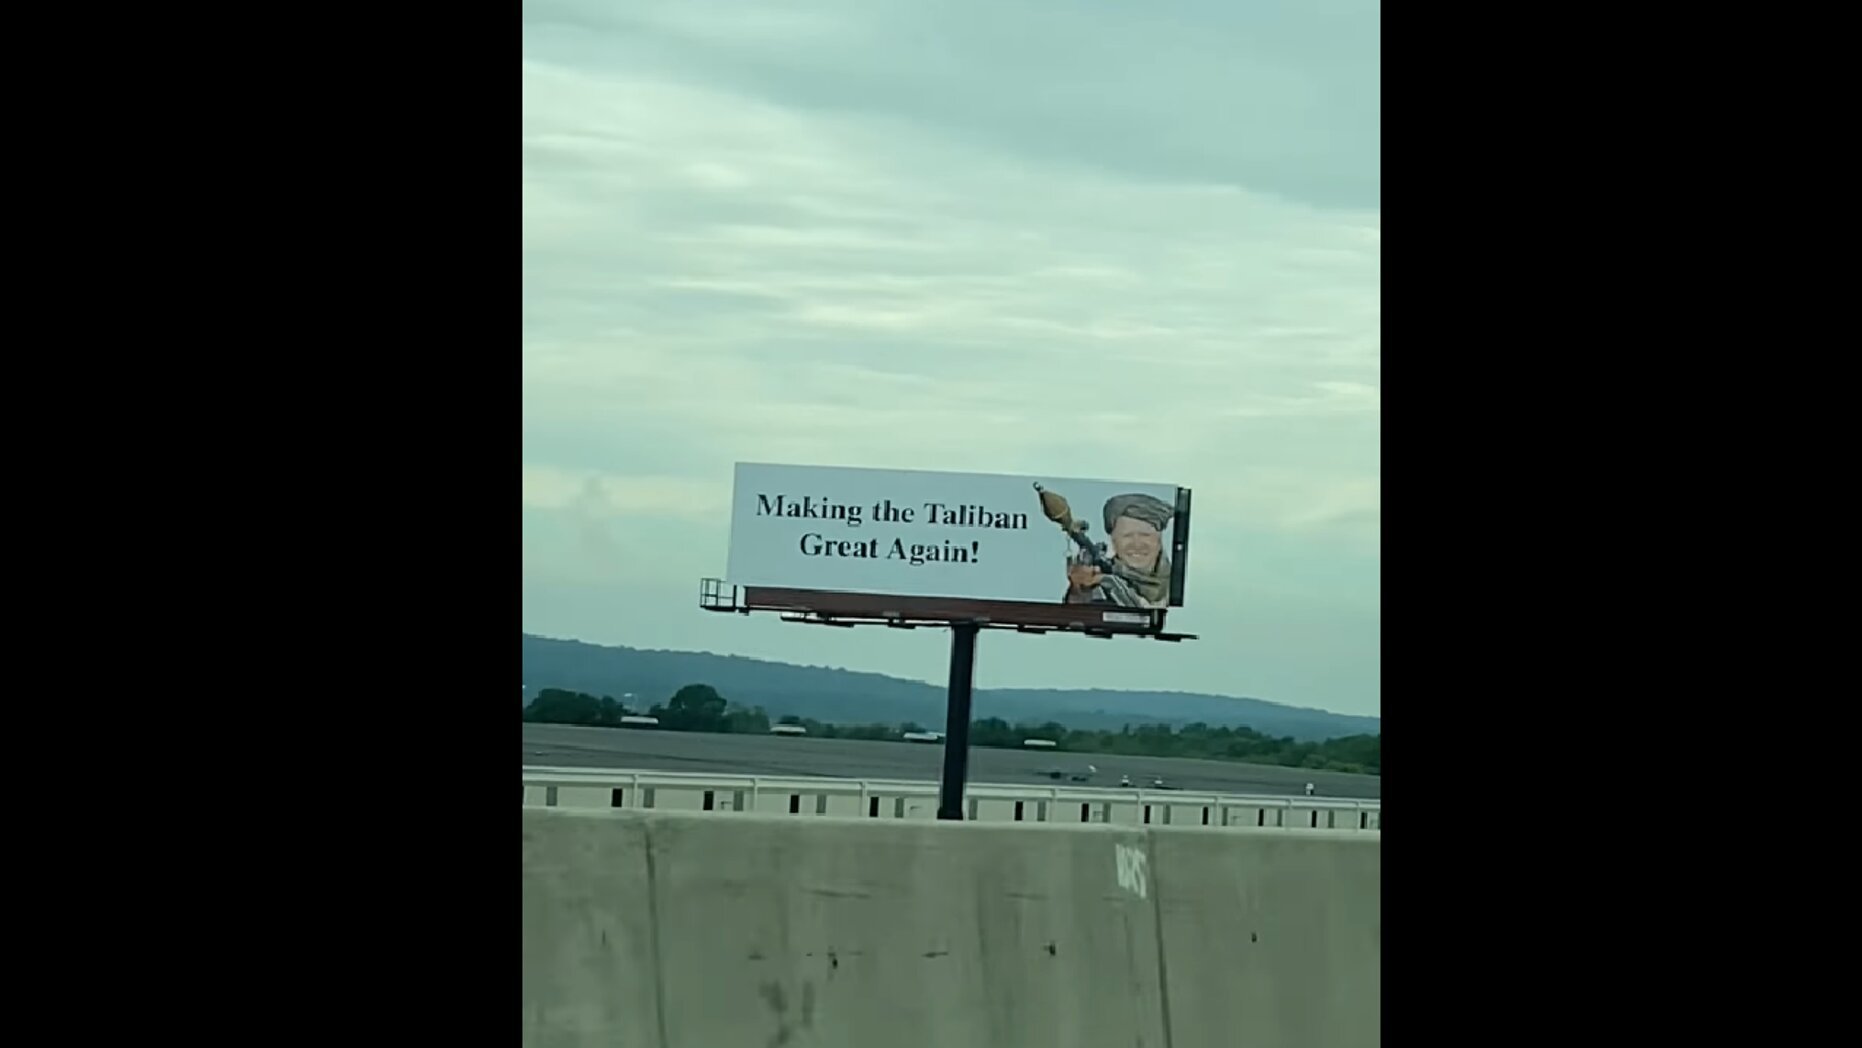  State Senator Speaks Out As To Why He Put Up Joe Biden “Making The Taliban Great Again” Billboards